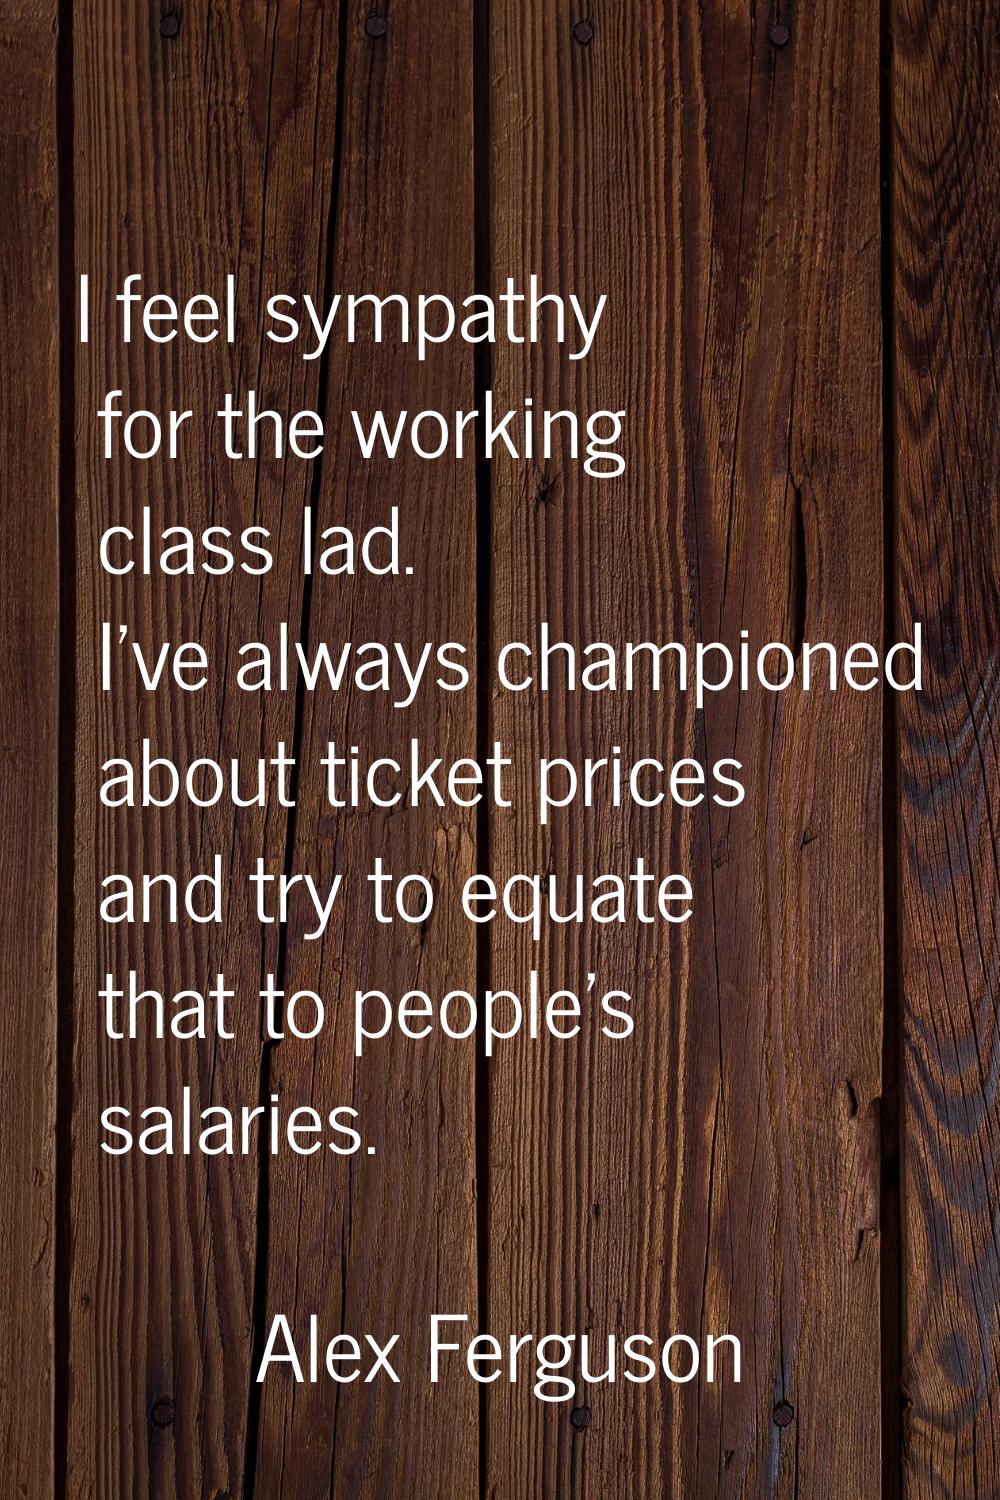 I feel sympathy for the working class lad. I've always championed about ticket prices and try to eq